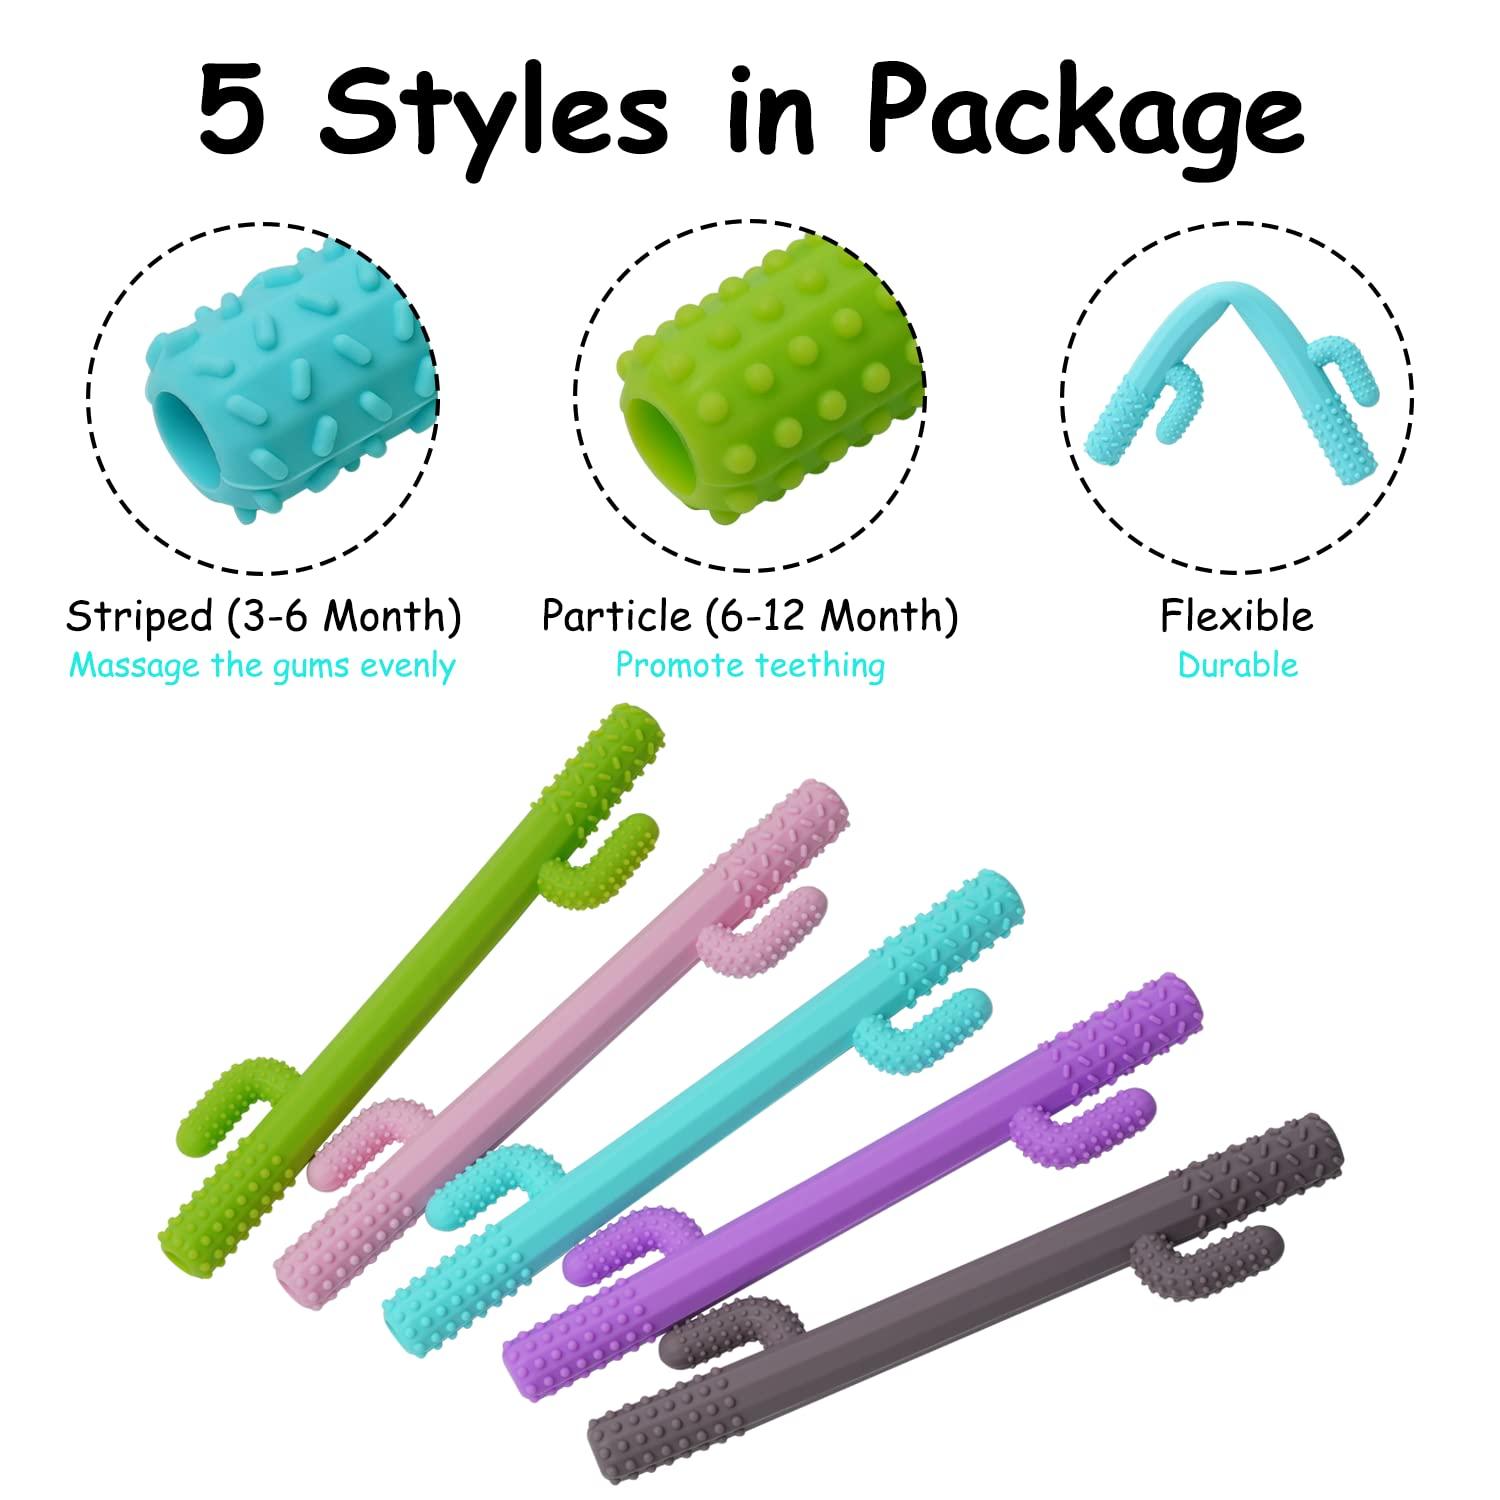 Cleaning Brush for Straws / Hollow Chews (1 Pack)